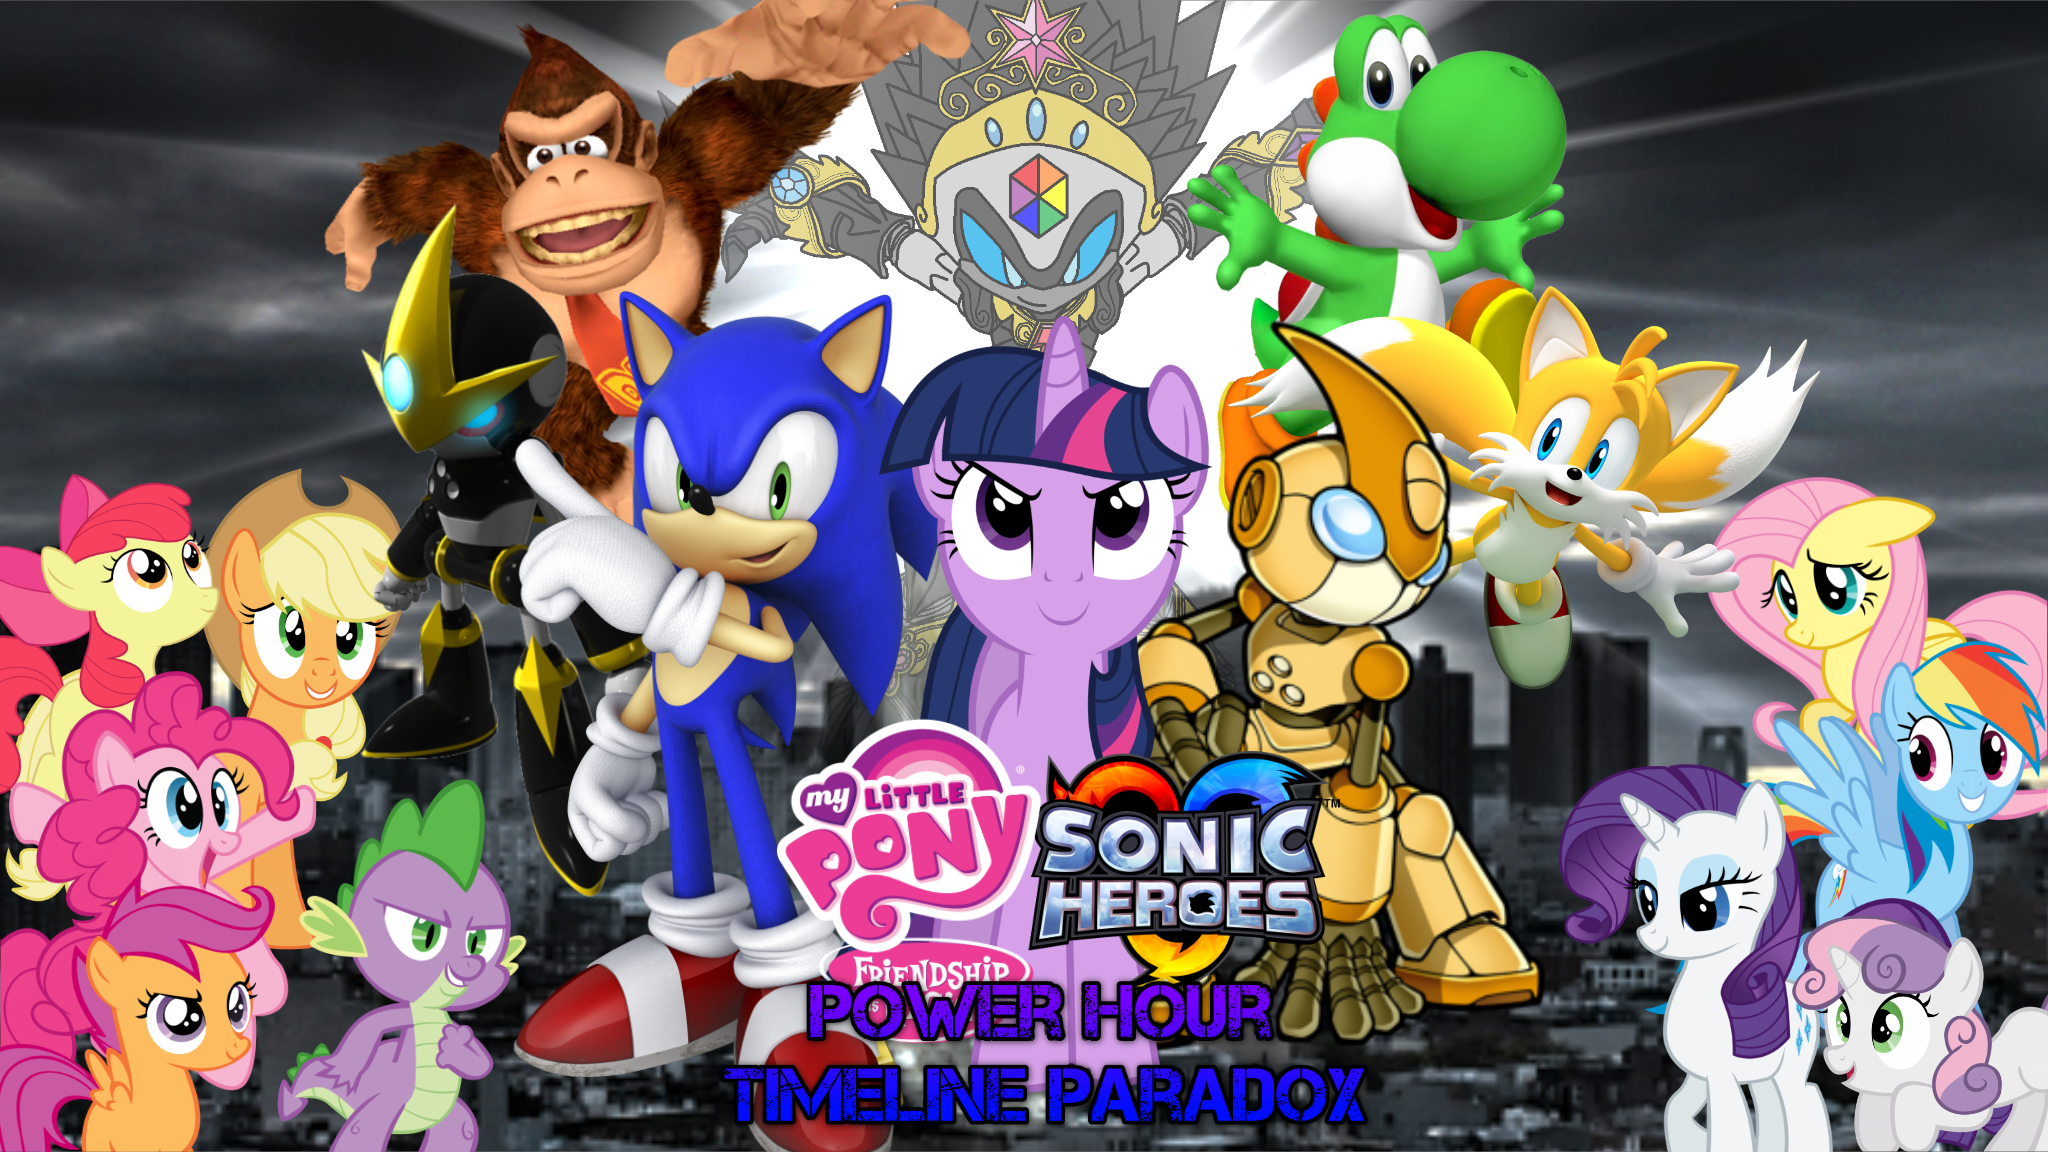 My Little Ponysonic Heroes Power Hour Timeline Paradox Poohs